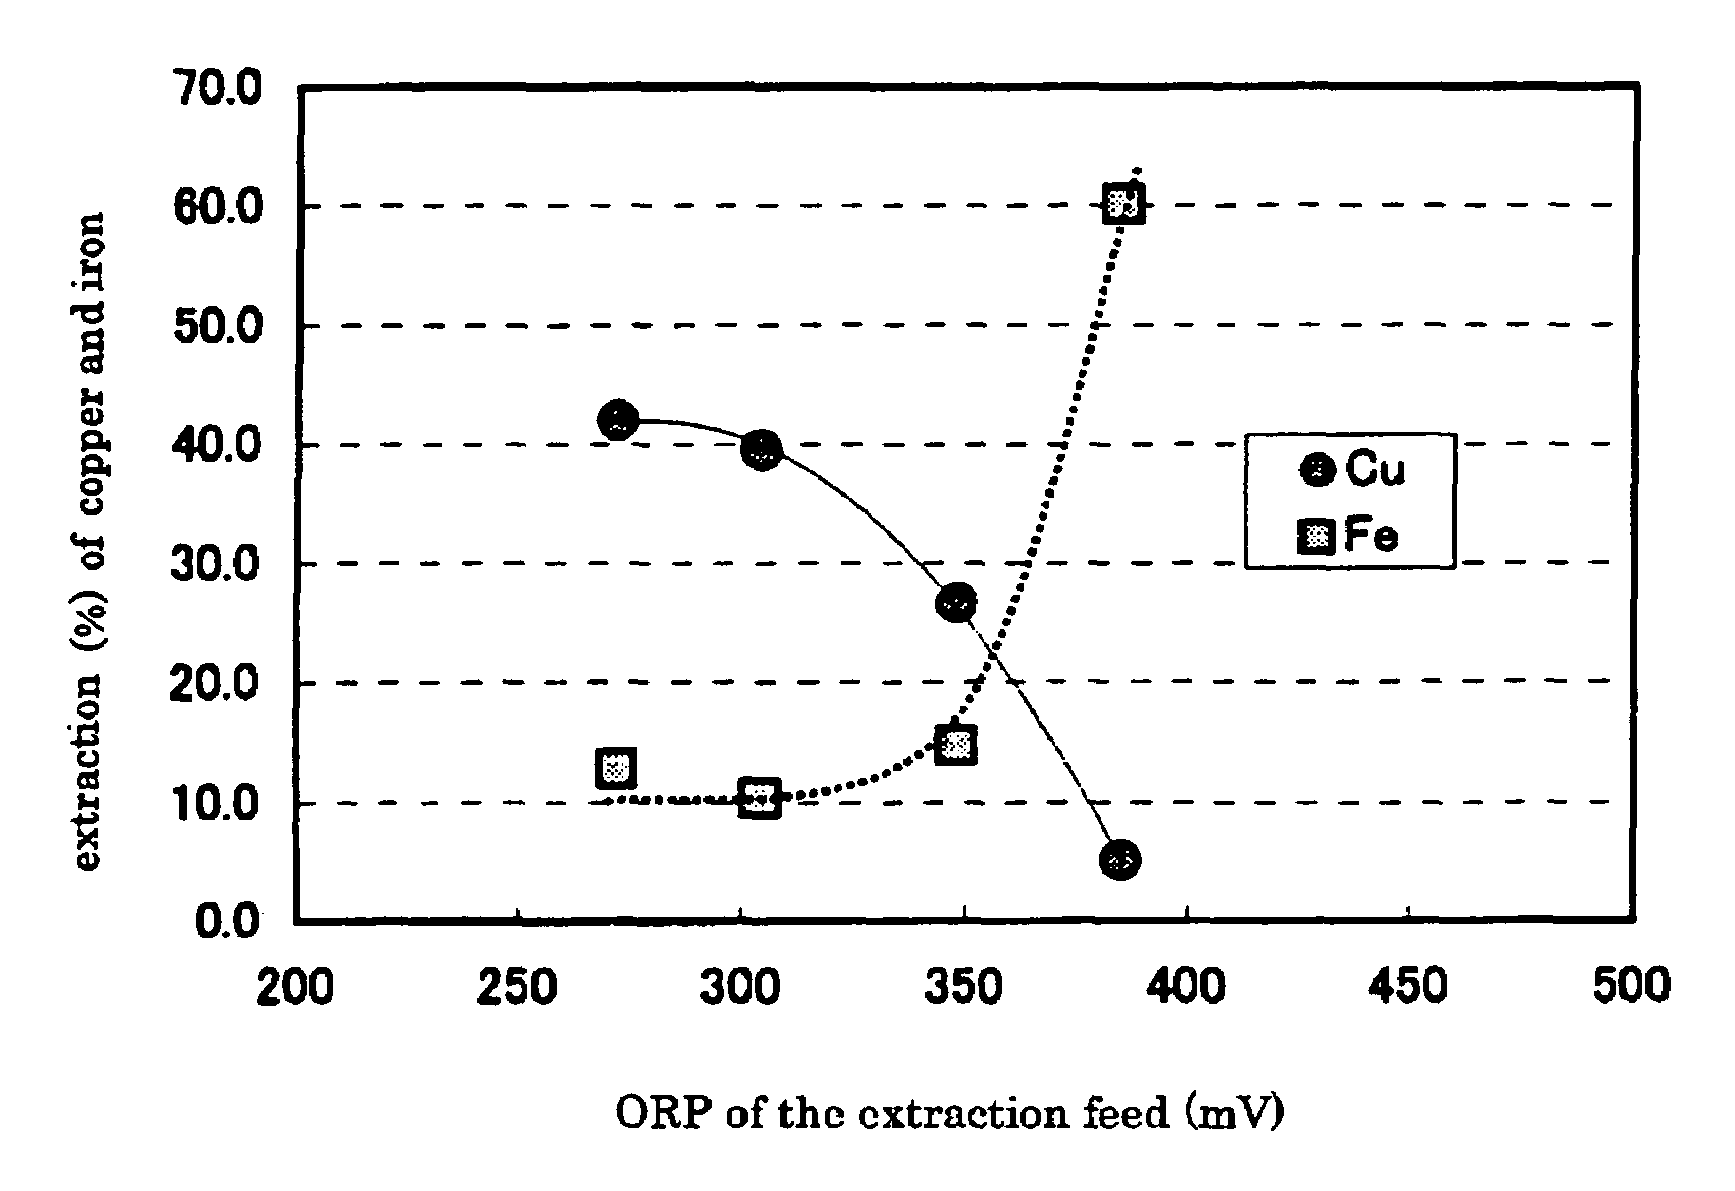 Process of solvent extraction of copper